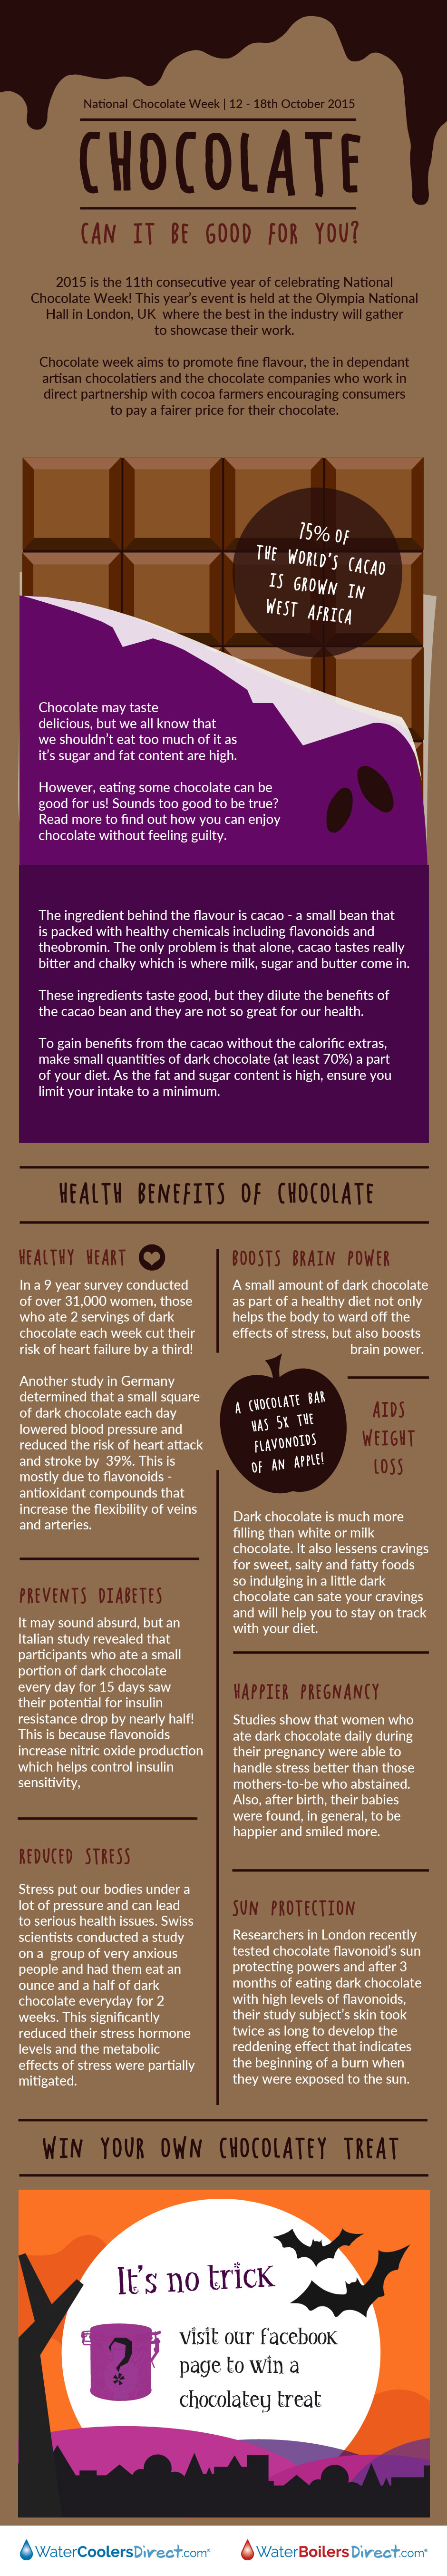 Can chocolate be good for you?